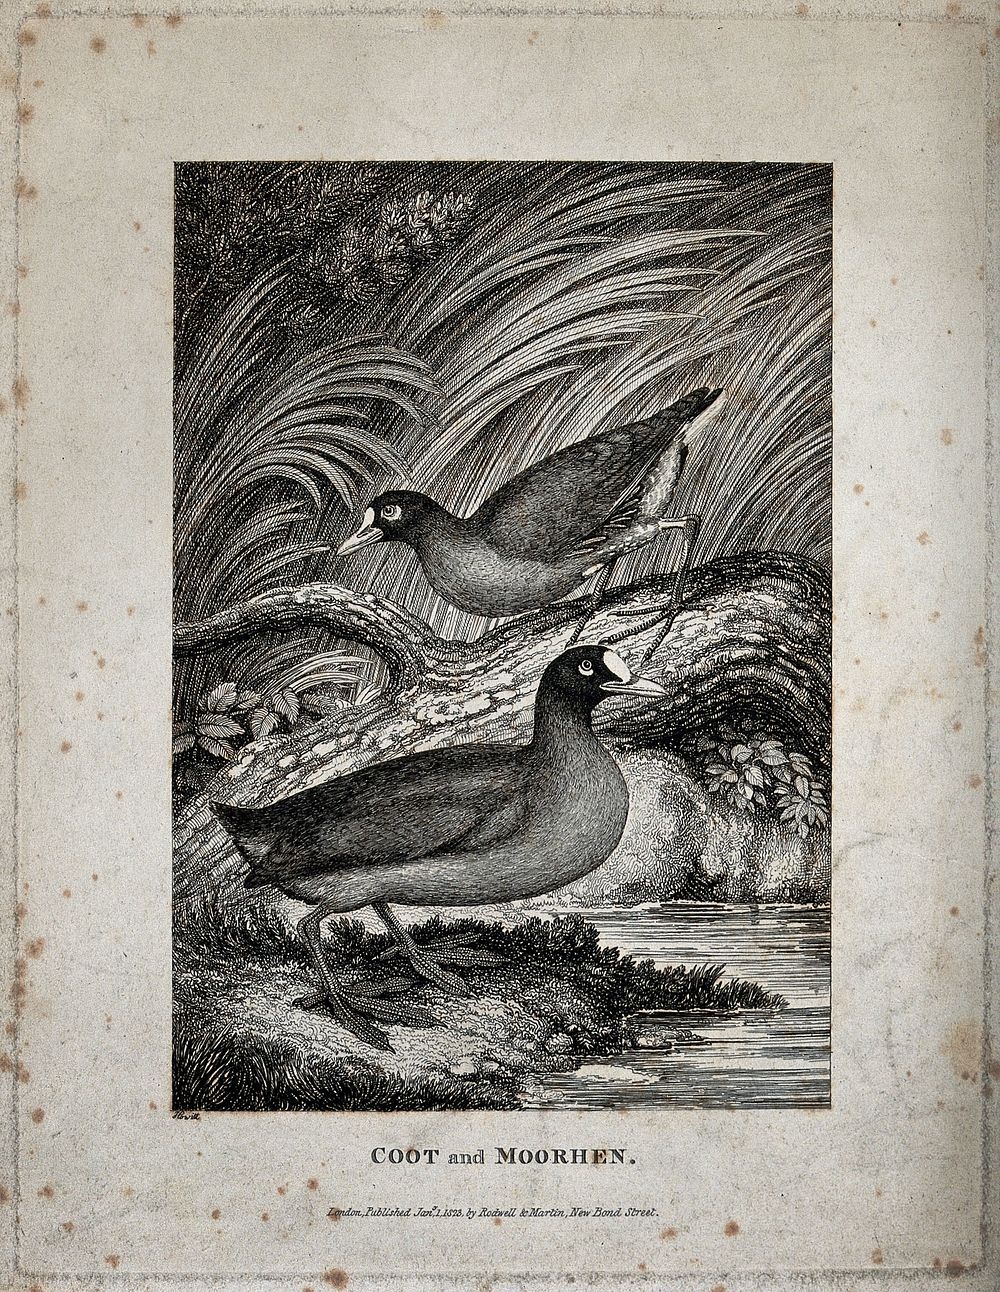 A coot and a moorhen on the shore of a river. Etching by W. S. Howitt.